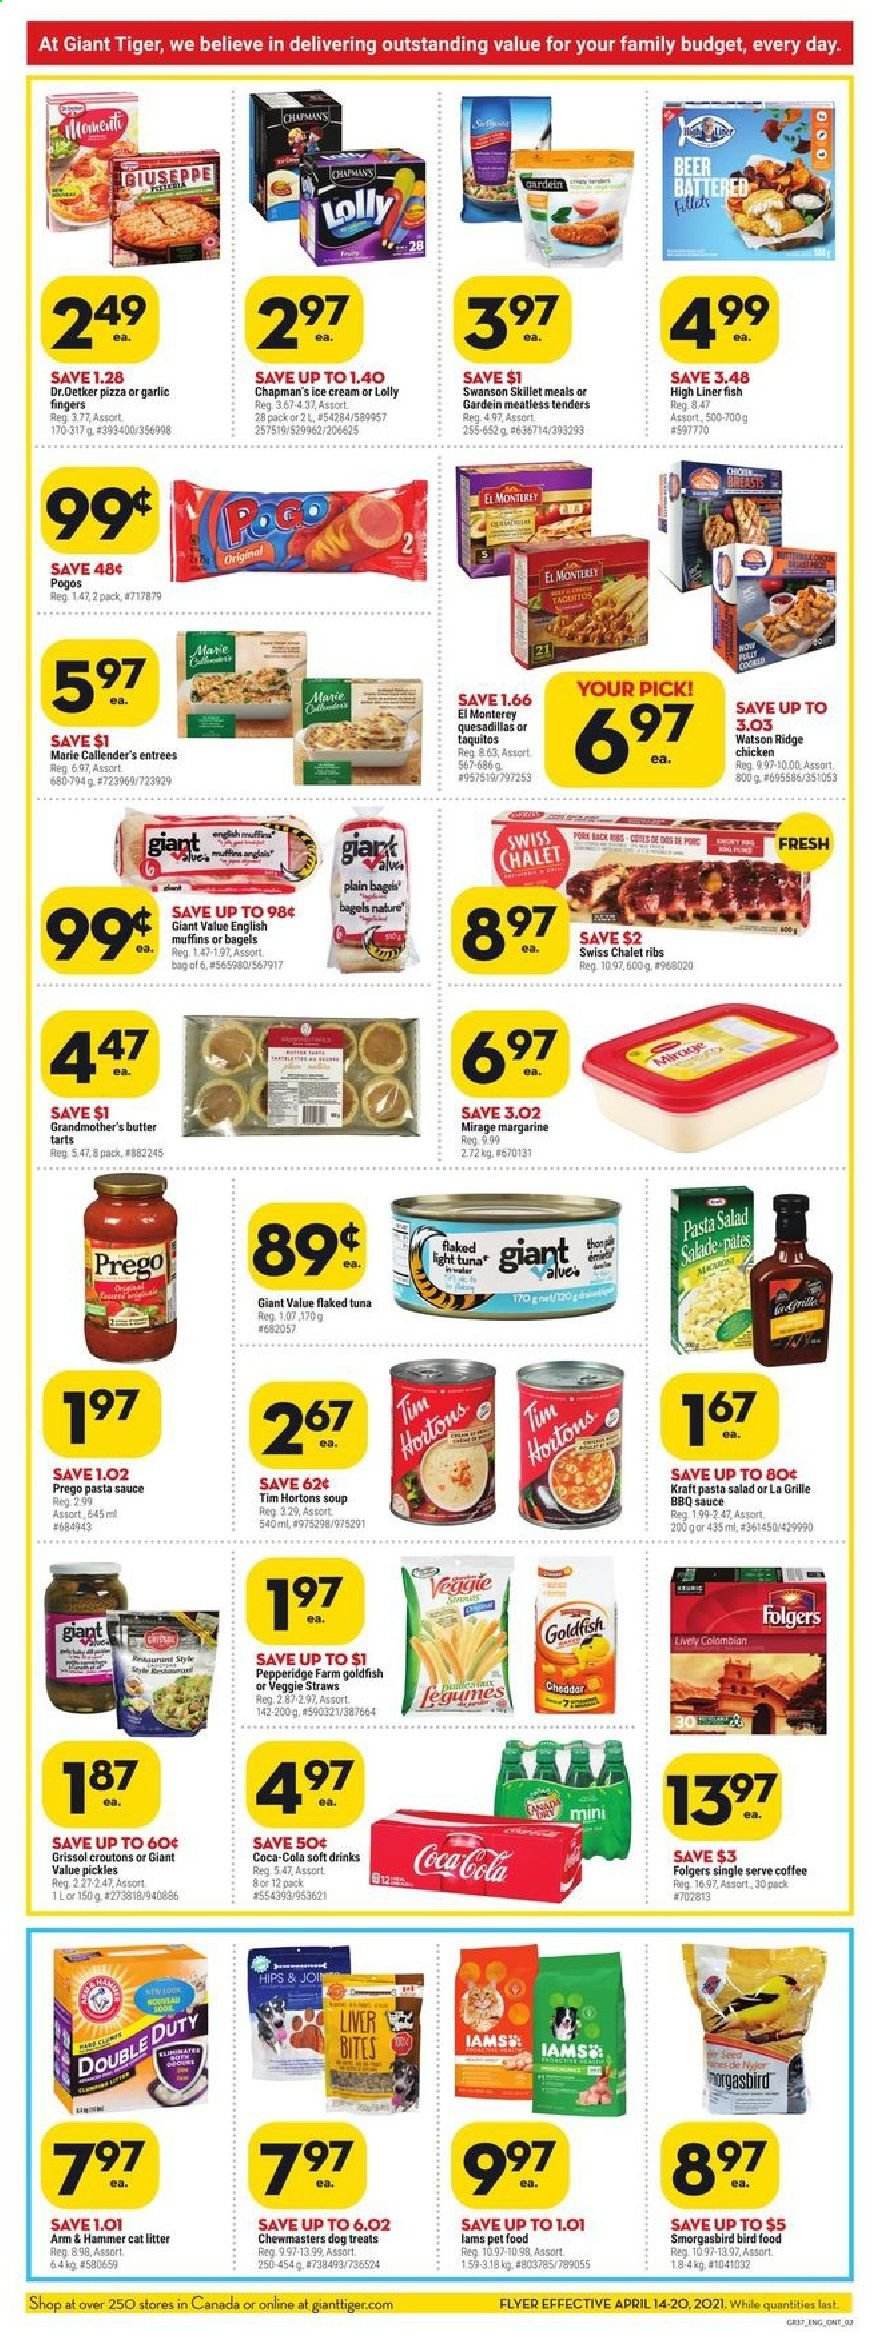 thumbnail - Giant Tiger Flyer - April 14, 2021 - April 20, 2021 - Sales products - bagels, english muffins, tuna, fish, pizza, pasta sauce, soup, sauce, Marie Callender's, taquitos, Kraft®, pasta salad, Dr. Oetker, butter, margarine, ice cream, lollipop, Goldfish, veggie straws, pickles, light tuna, BBQ sauce, Coca-Cola, soft drink, coffee, Folgers, L'Or, beer, cat litter, animal food, plant seeds, Iams, hammer. Page 2.